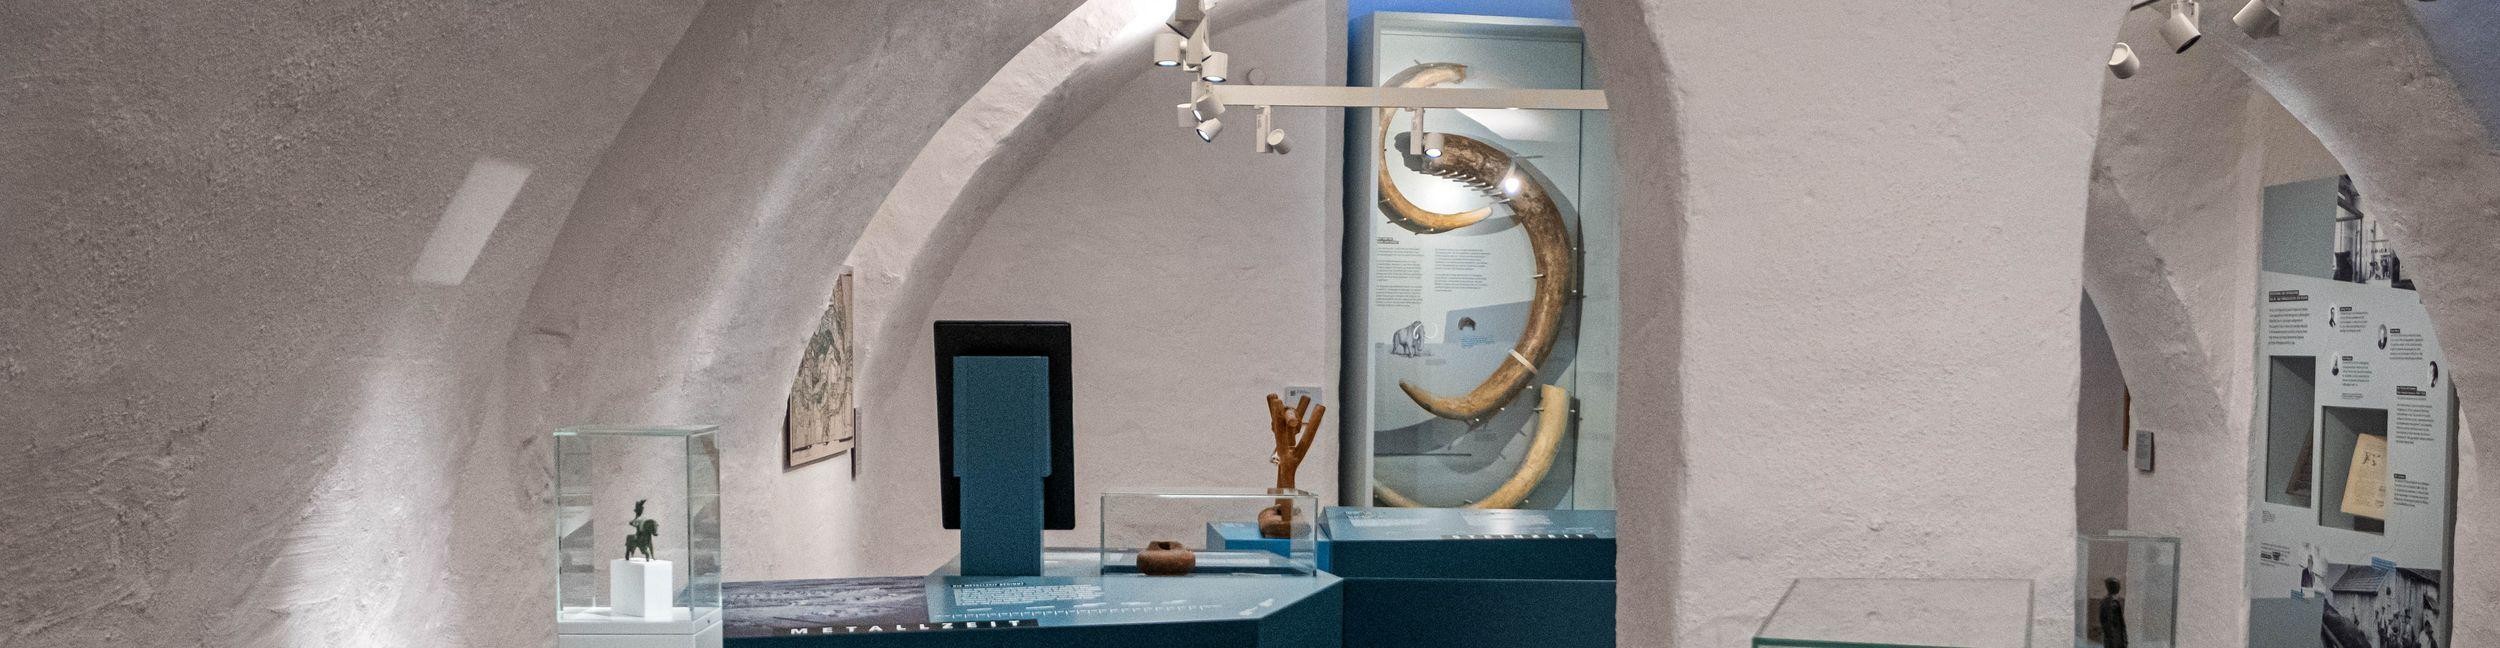 Permanent exhibition on prehistory and early history: Mammoth tusks are displayed in a showcase.